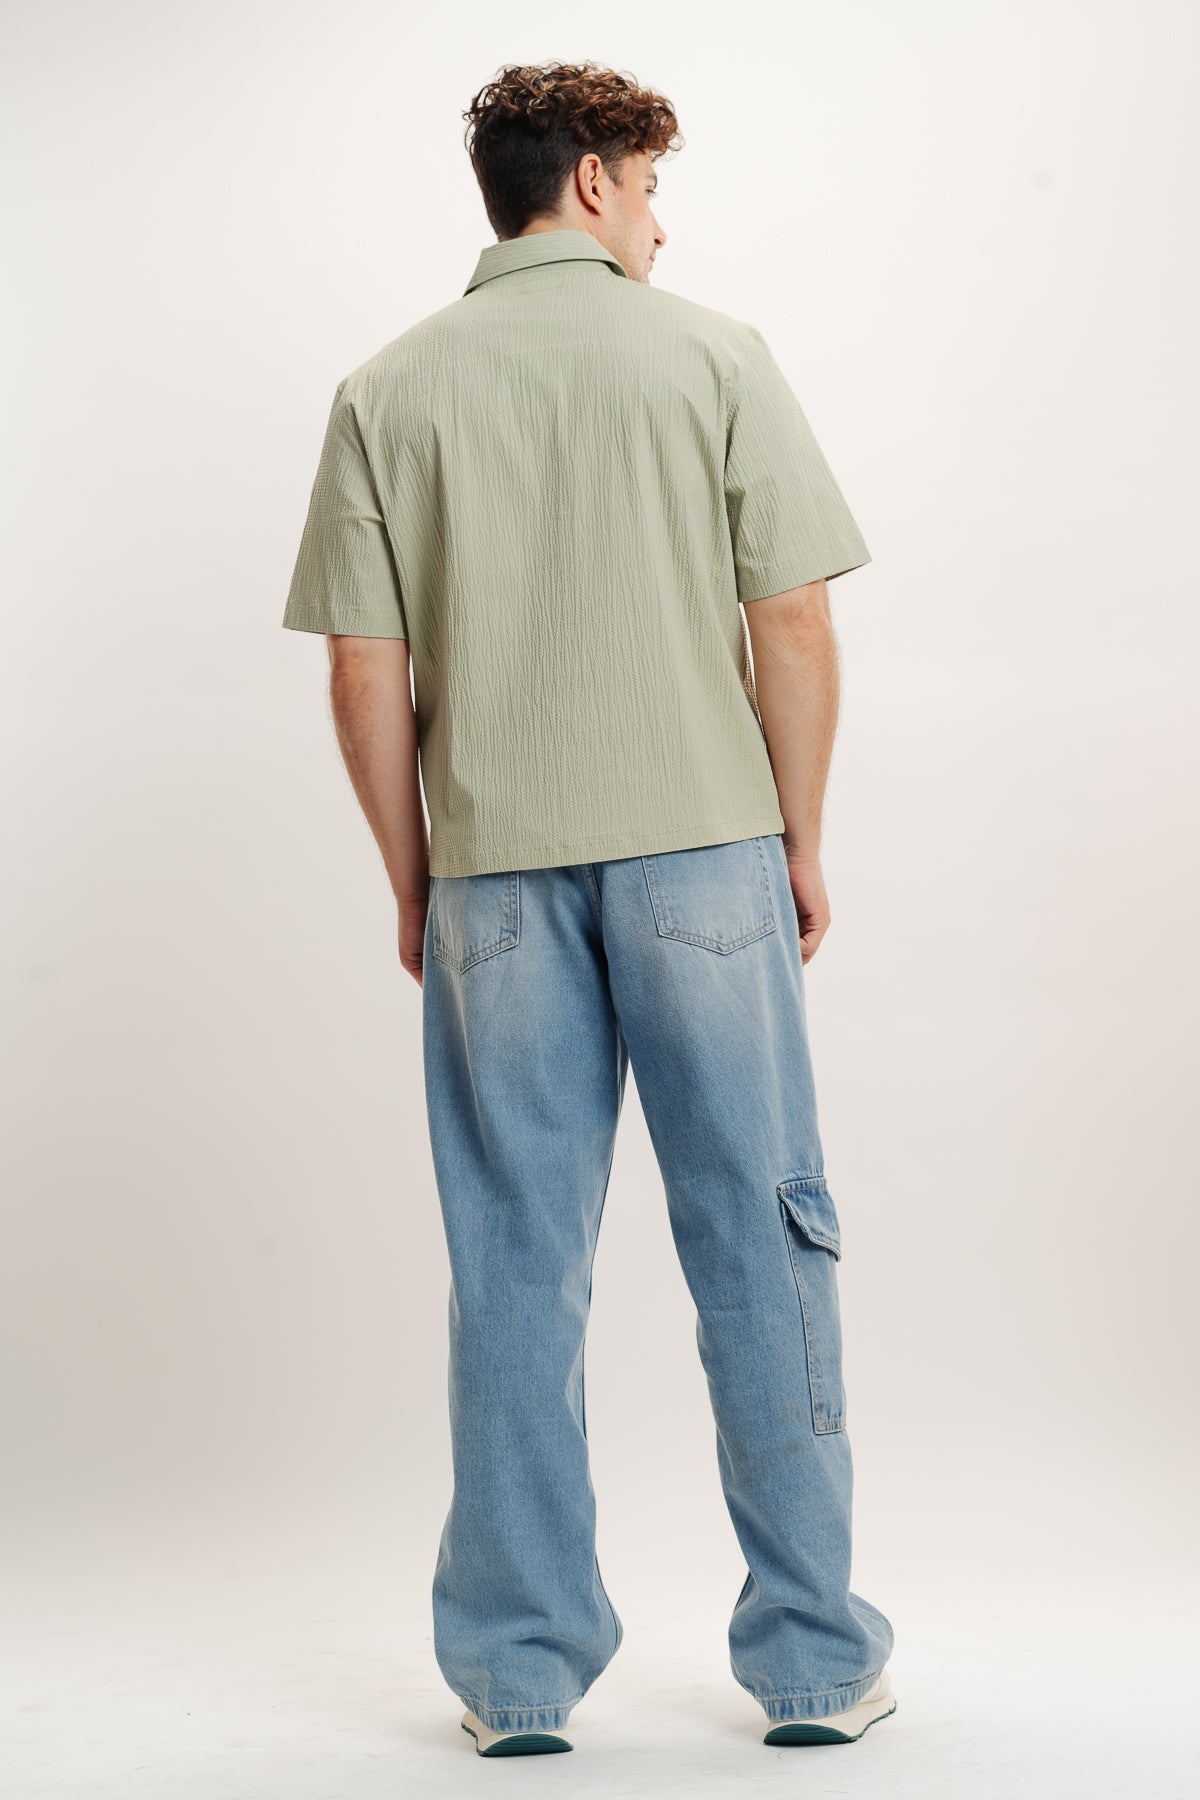 MEN'S MID BLUE RELAXED JEANS